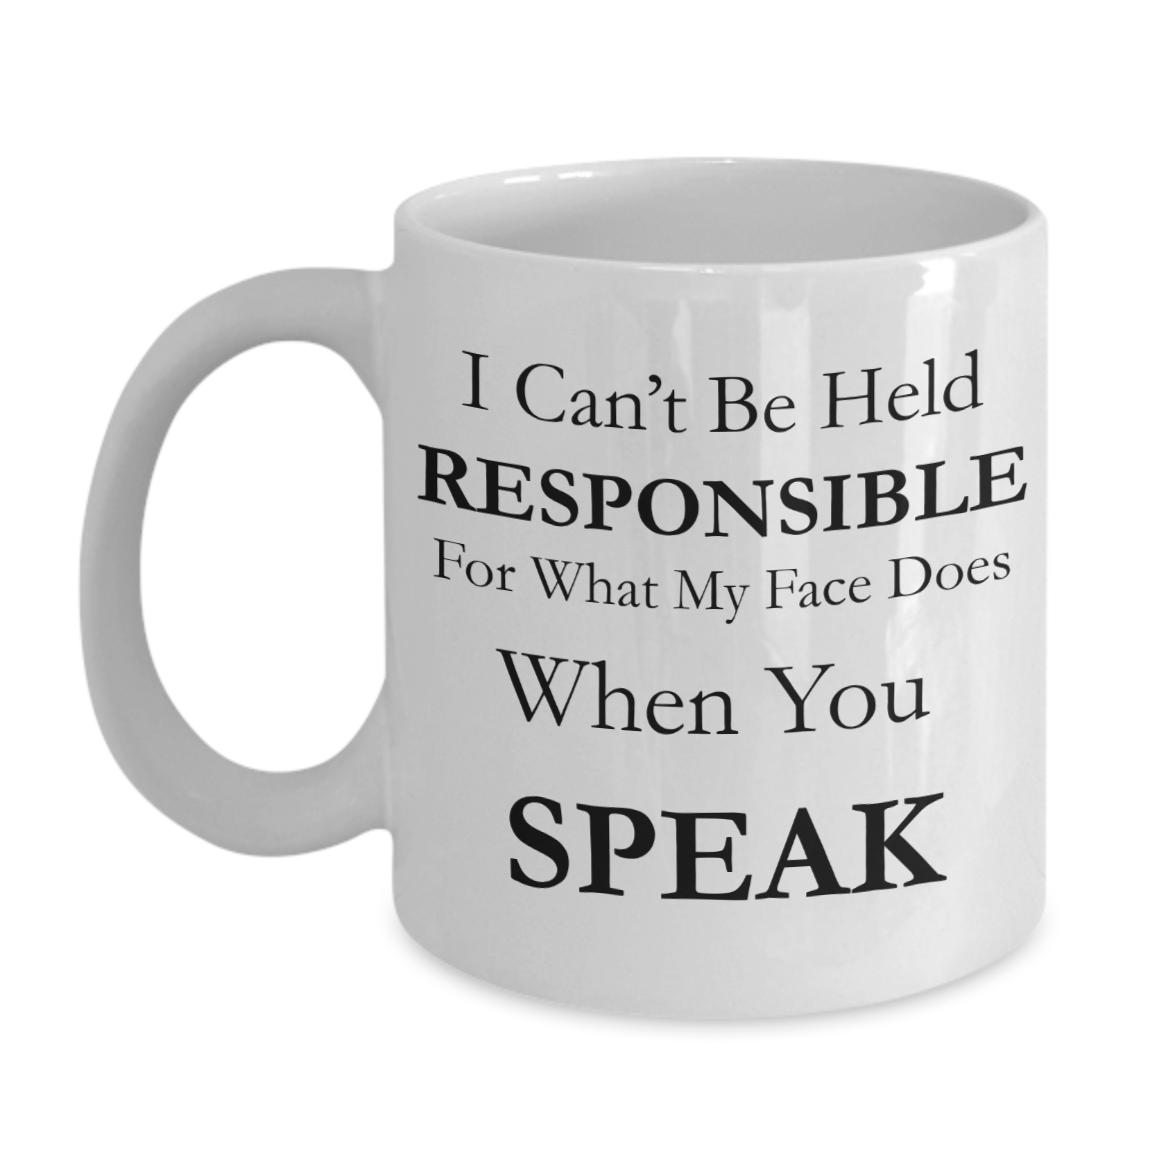 Not Responsible - Funny Quotes Coffee Mug